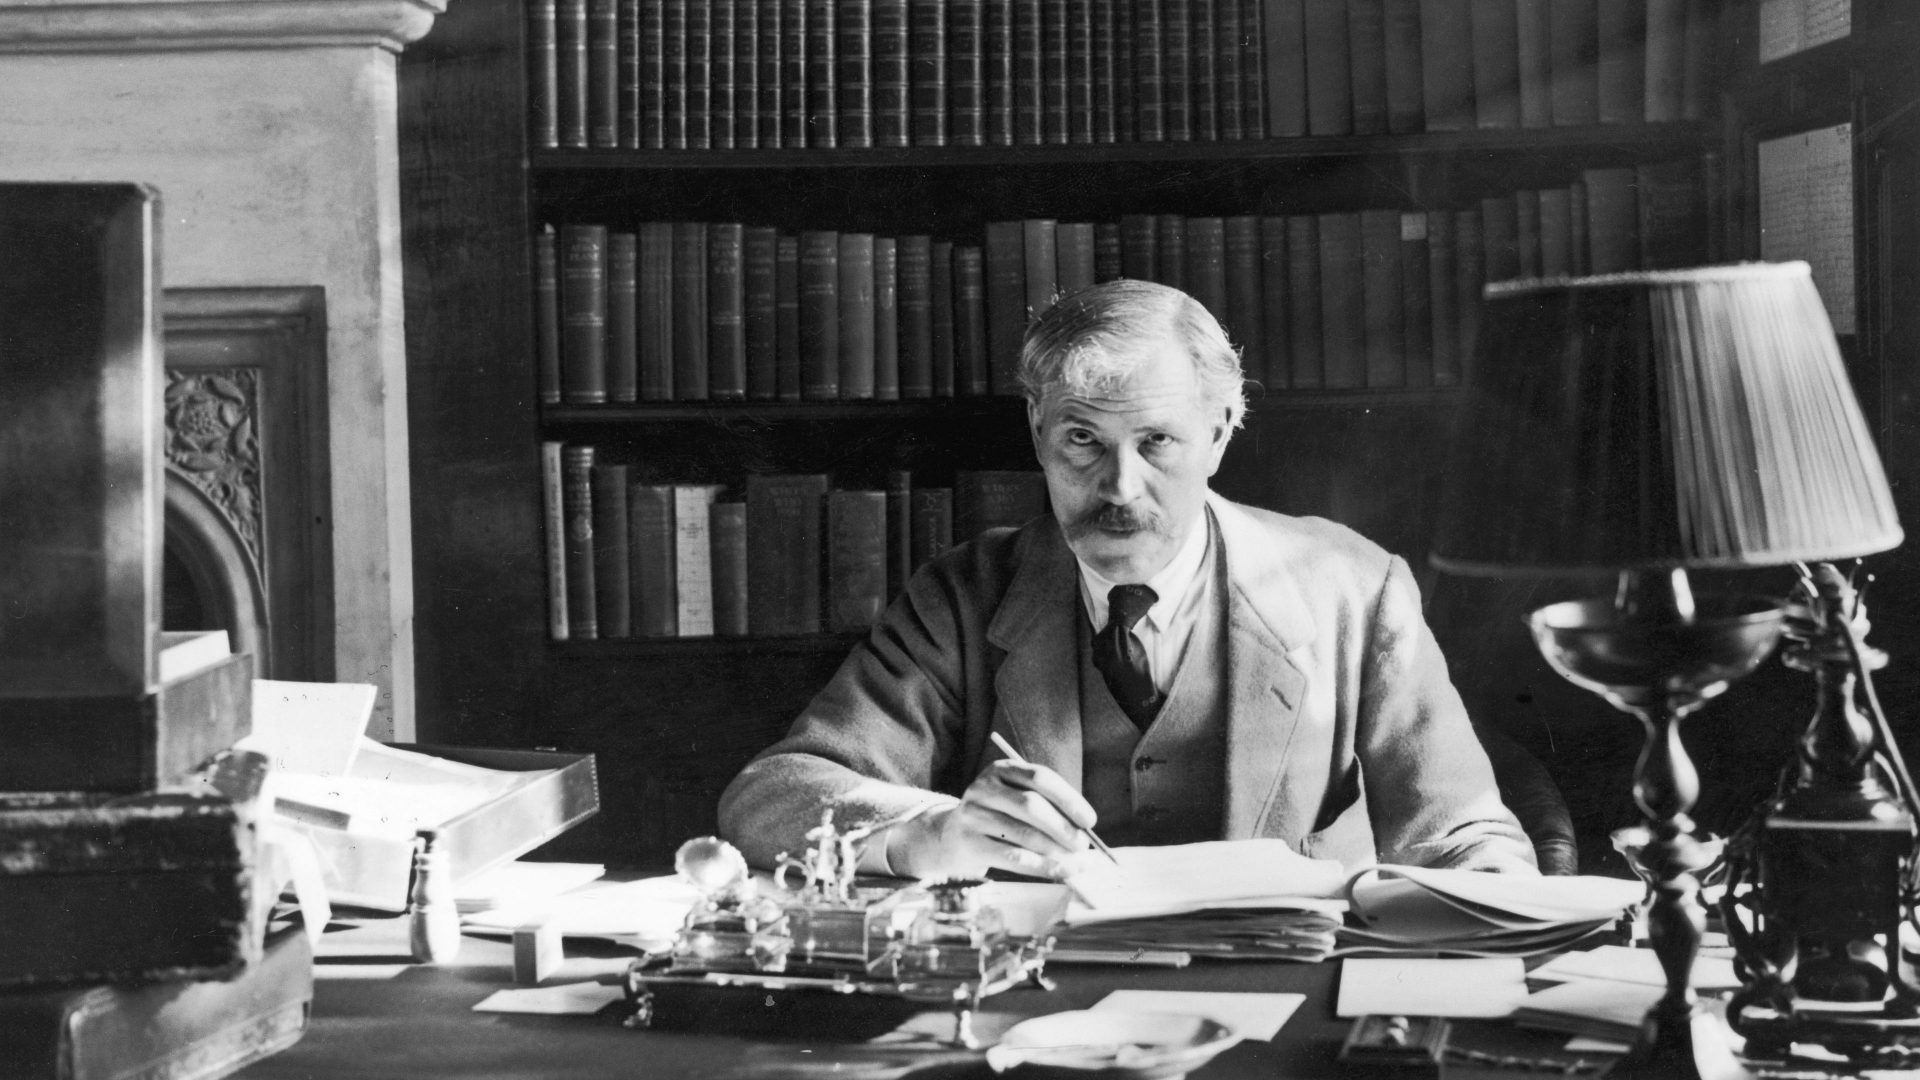 Prime Minister Ramsay MacDonald at work in his study at Chequers. Photo: Topical Press Agency/Getty Images